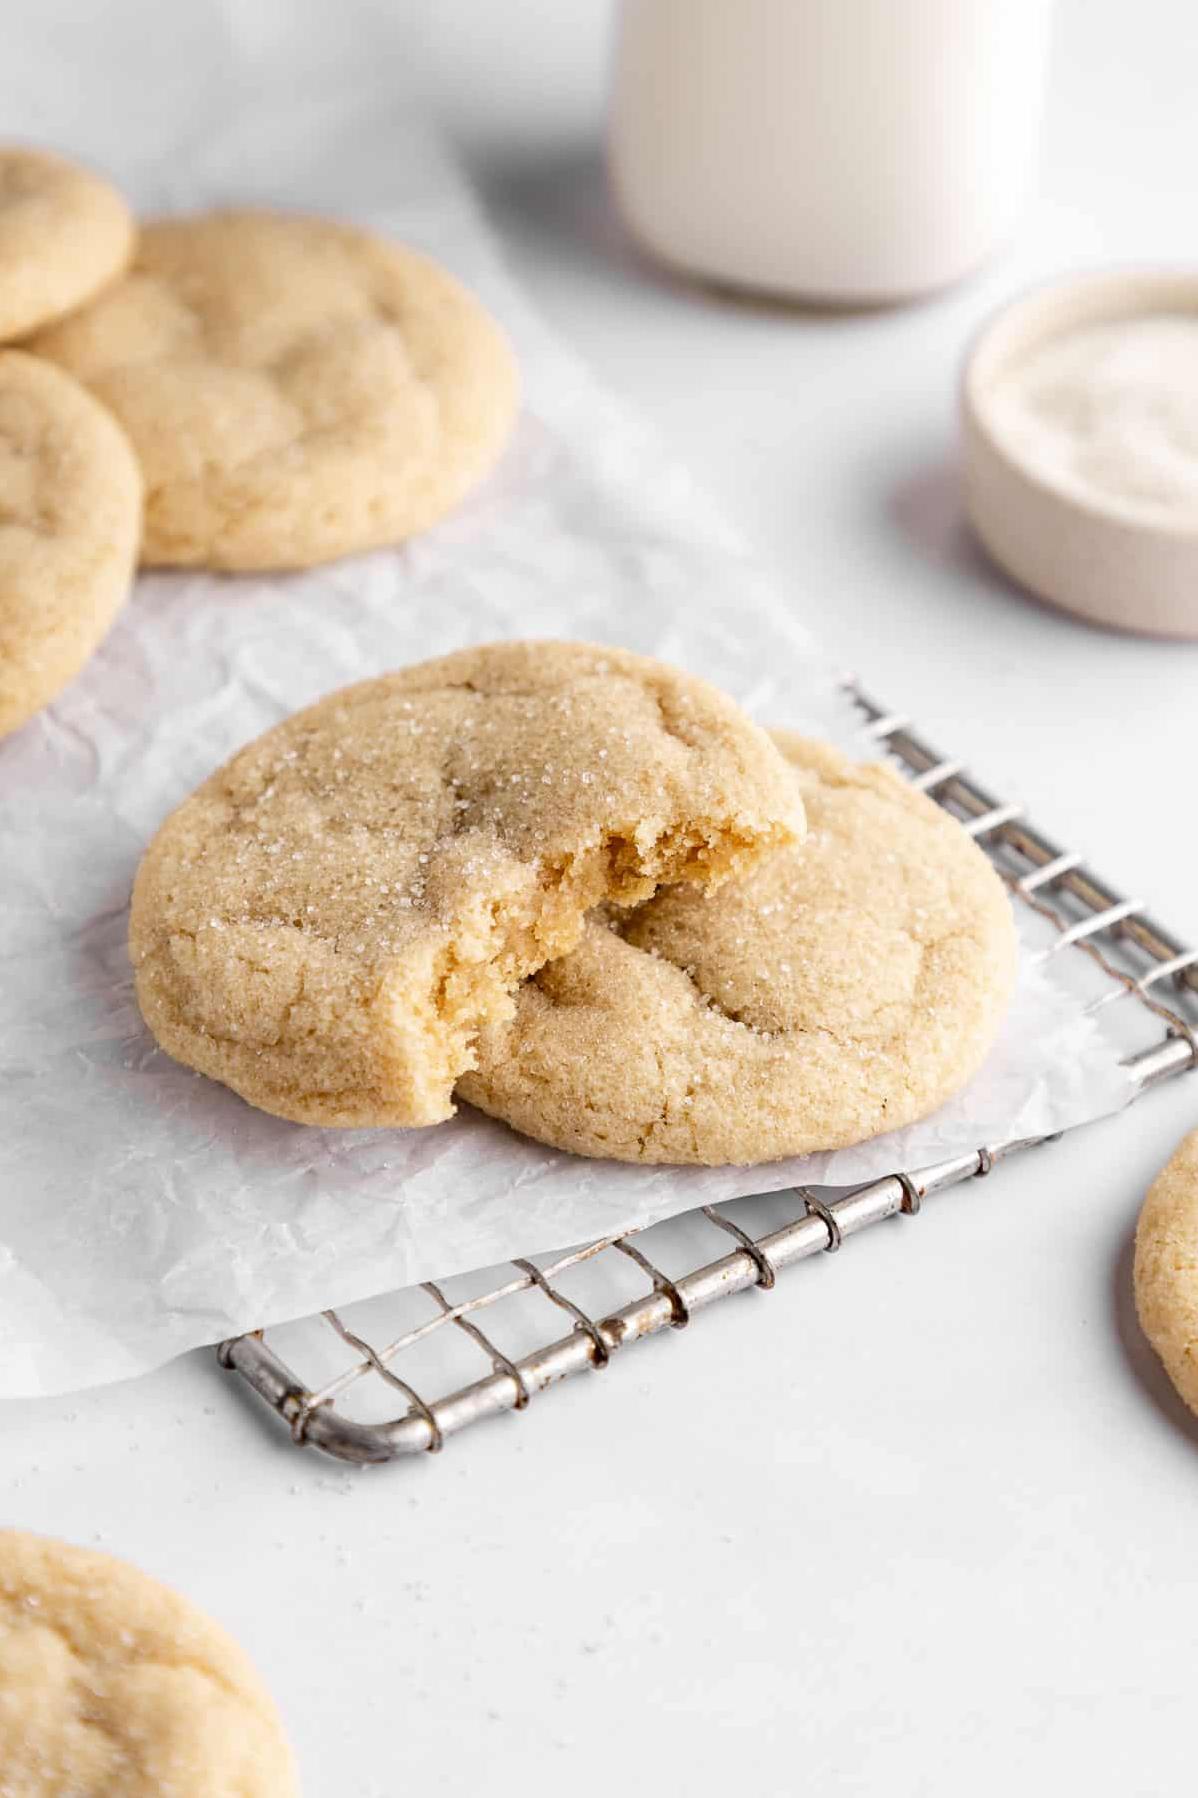  Catch me if you can: freshly baked vegan sugar cookies.